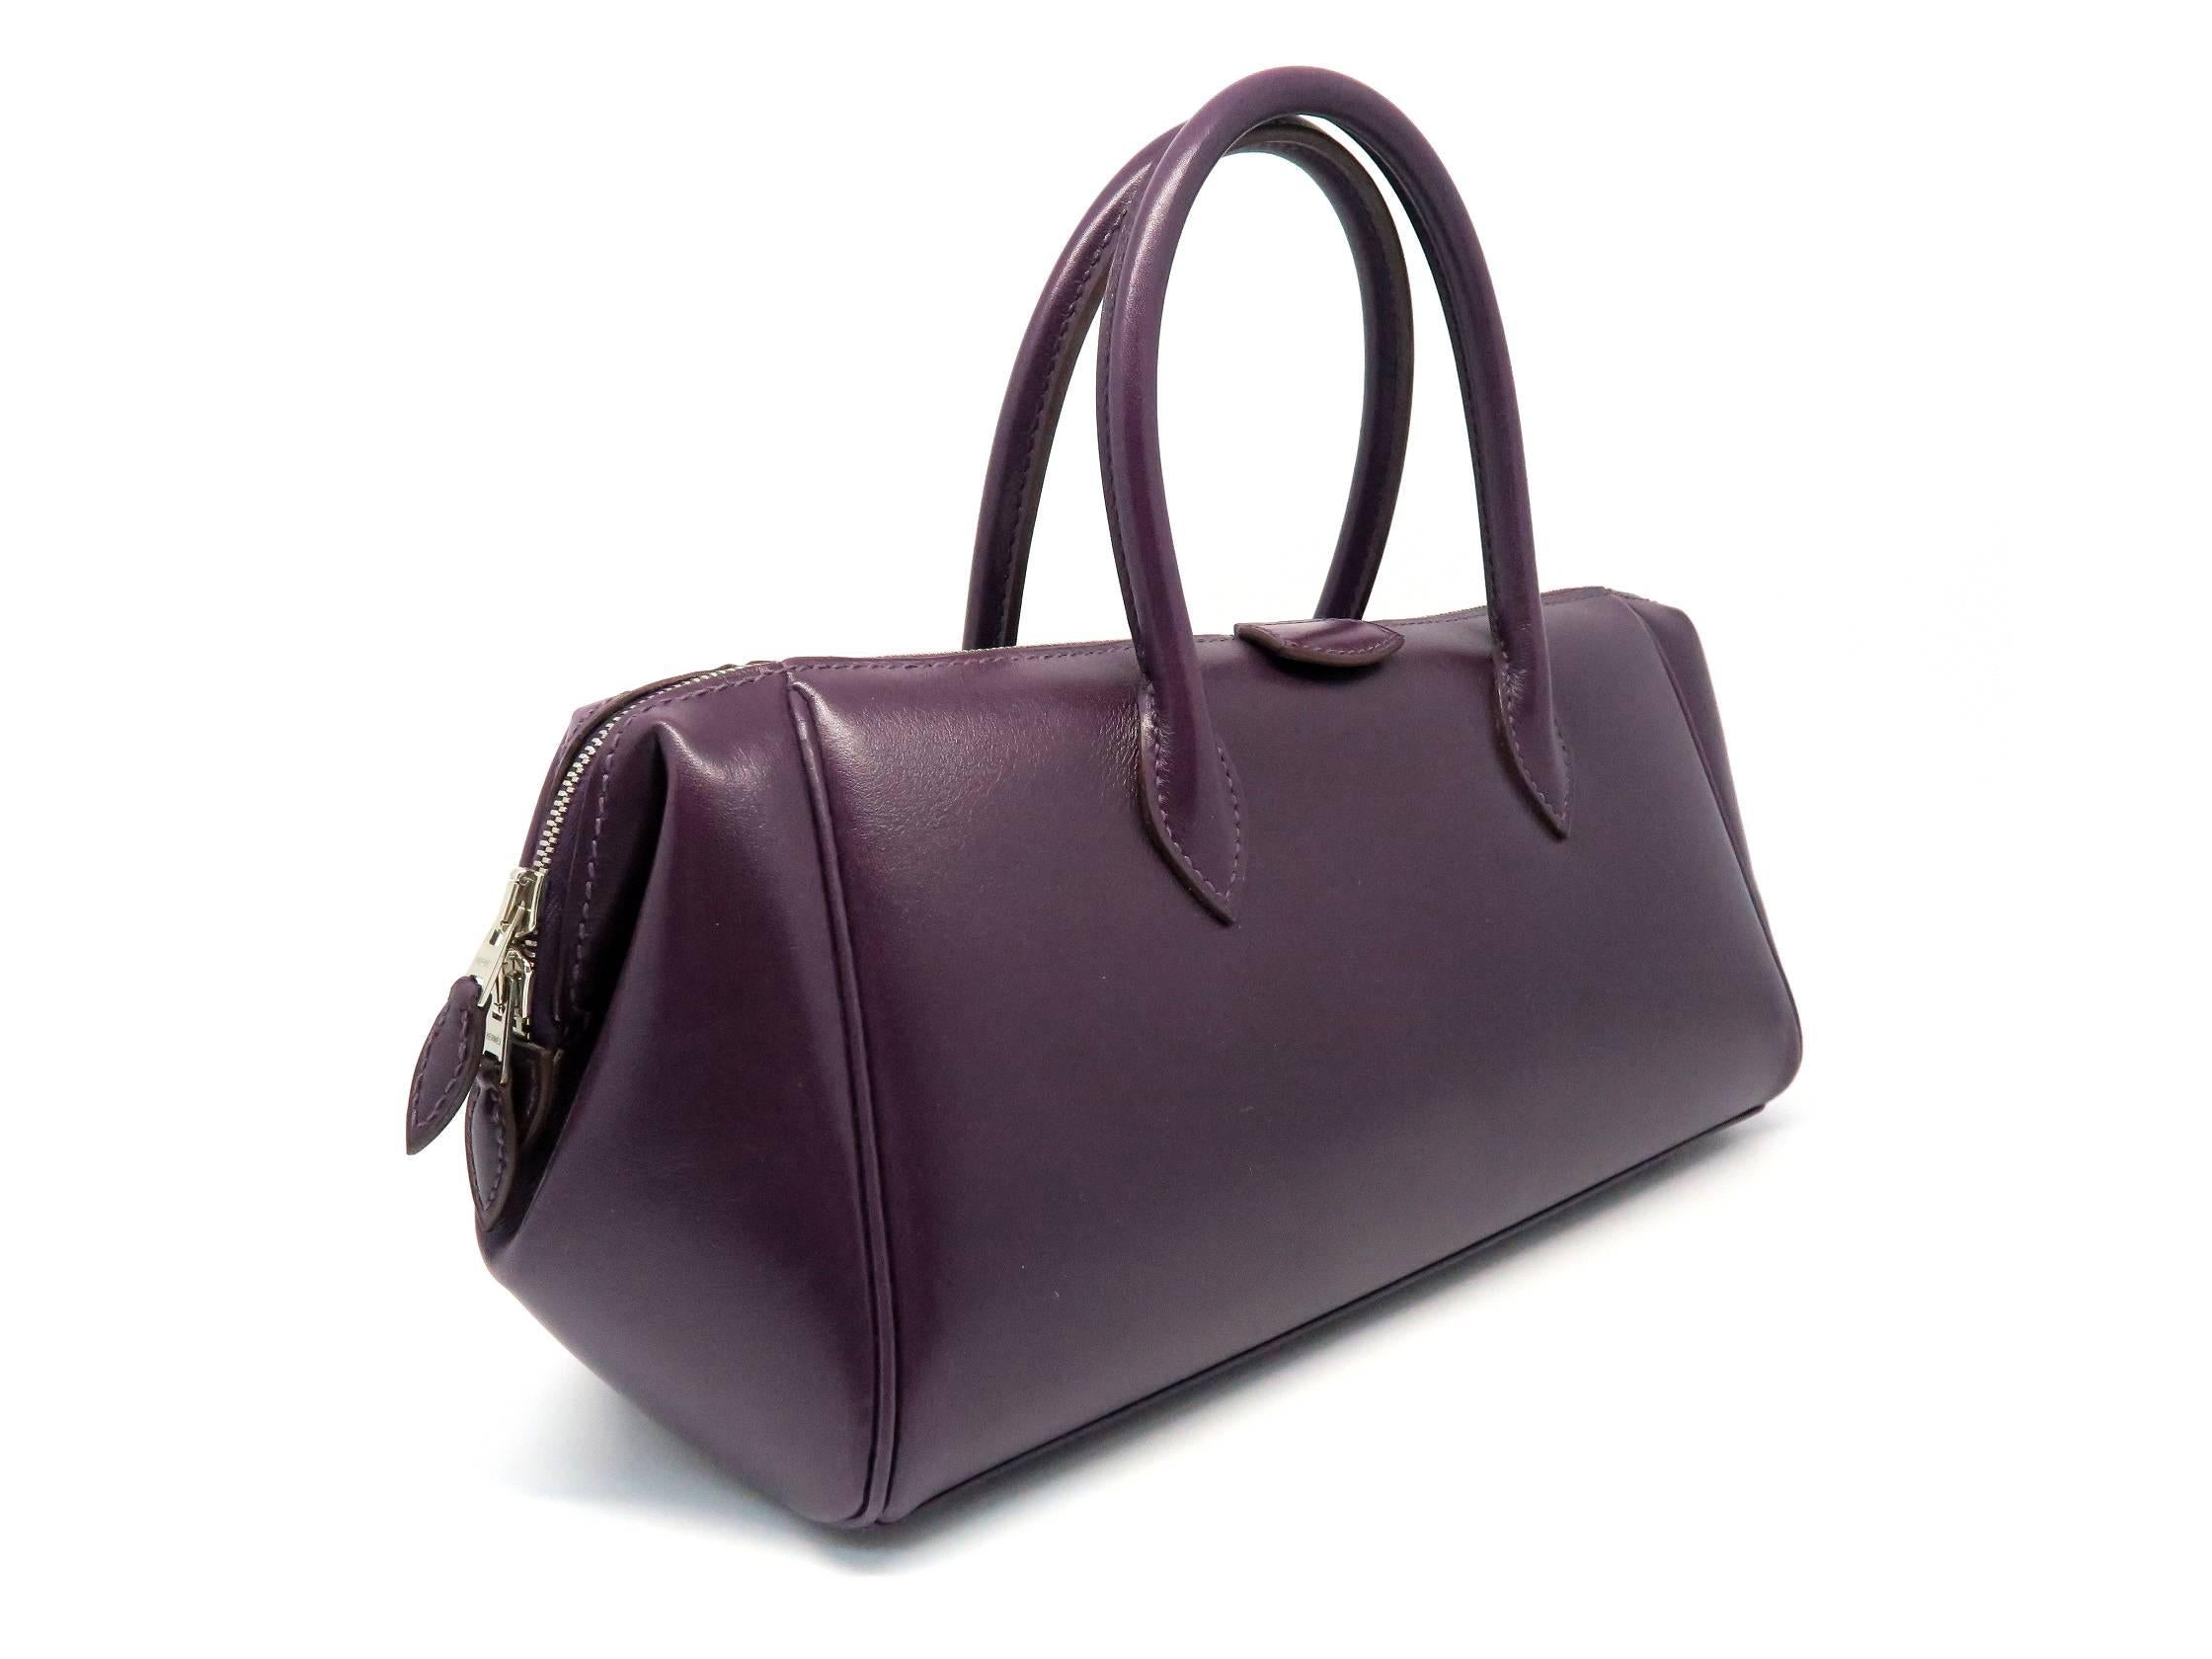 Color: Purple / Raisin (designer color)
Material: Box Calf Leather

Condition:
Rank A
Overall: Good, few minor defects
Surface: Good
Corners: Minor Scratches
Edges: Good
Handles/Straps: Good
Hardware: Minor Scratches

Dimensions: 
W30 x H14 x D9.5cm